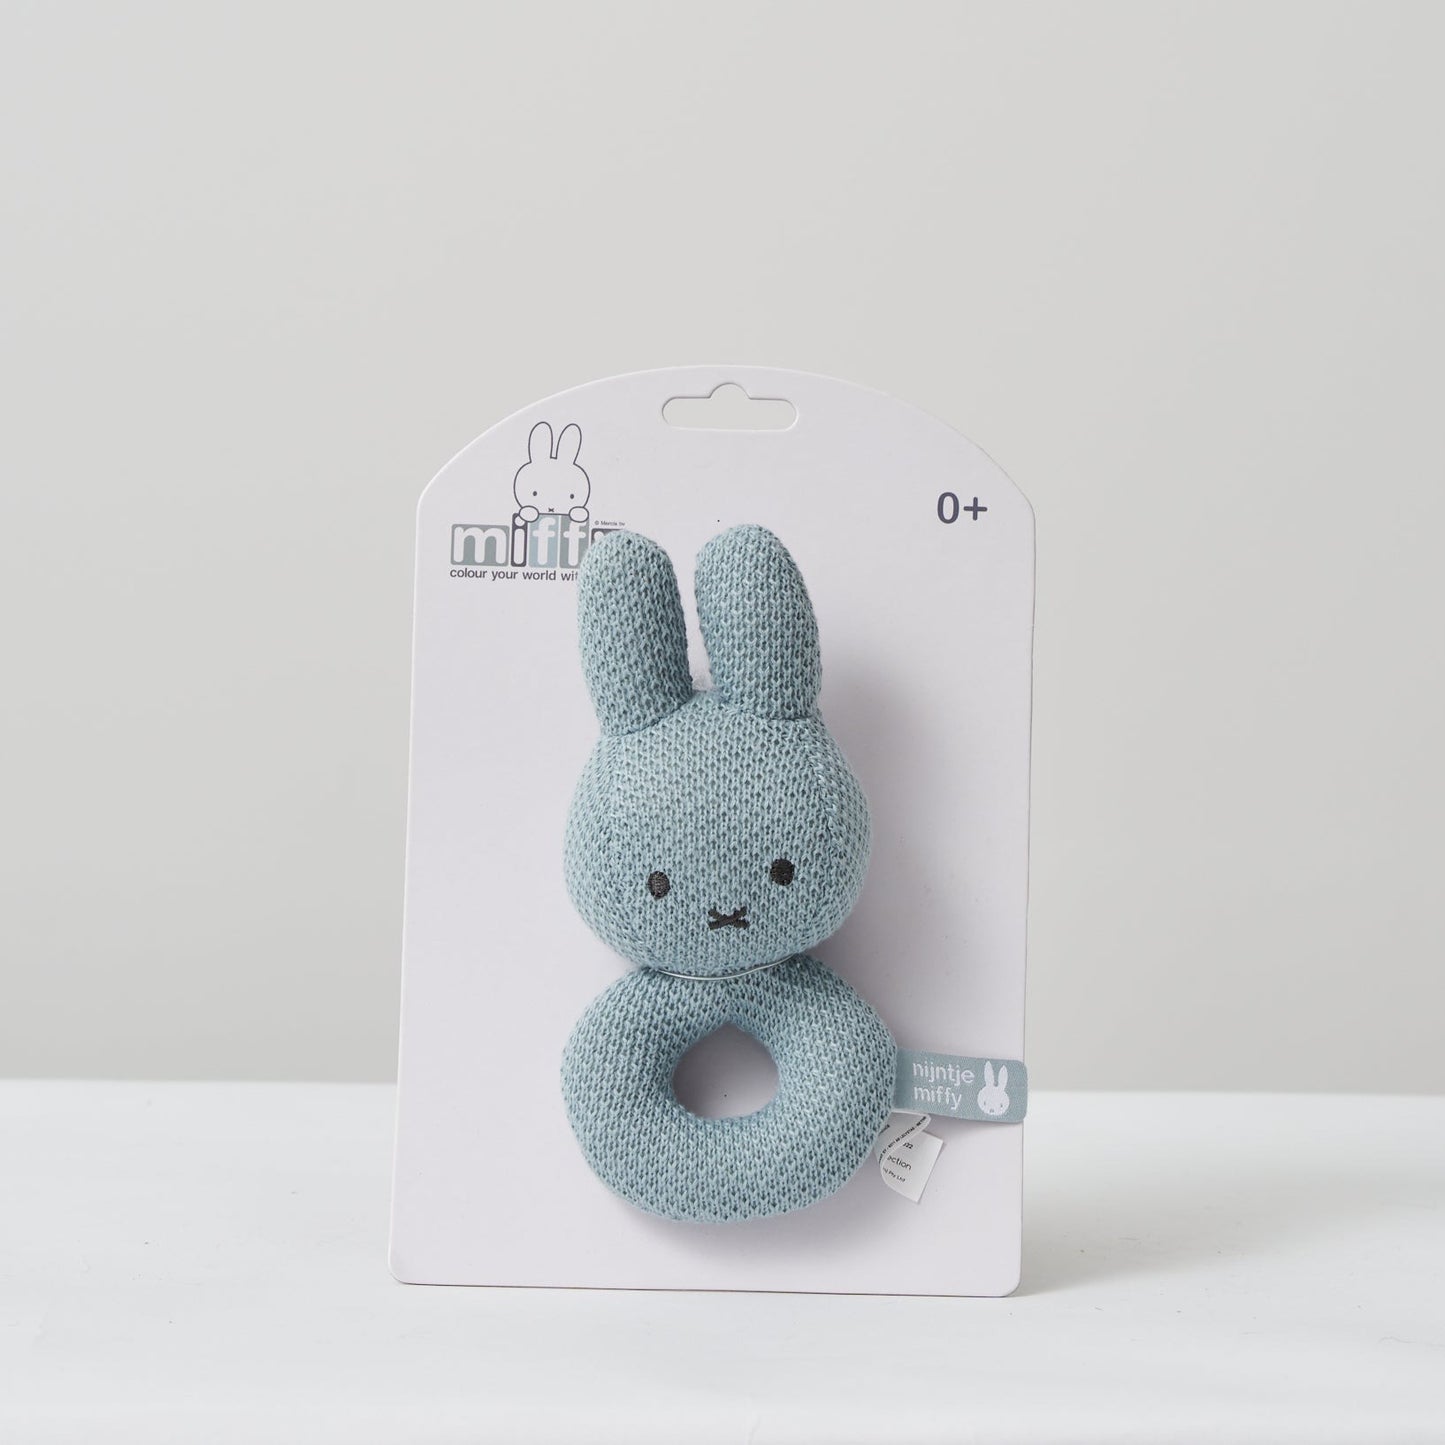 Miffy Ring Rattle